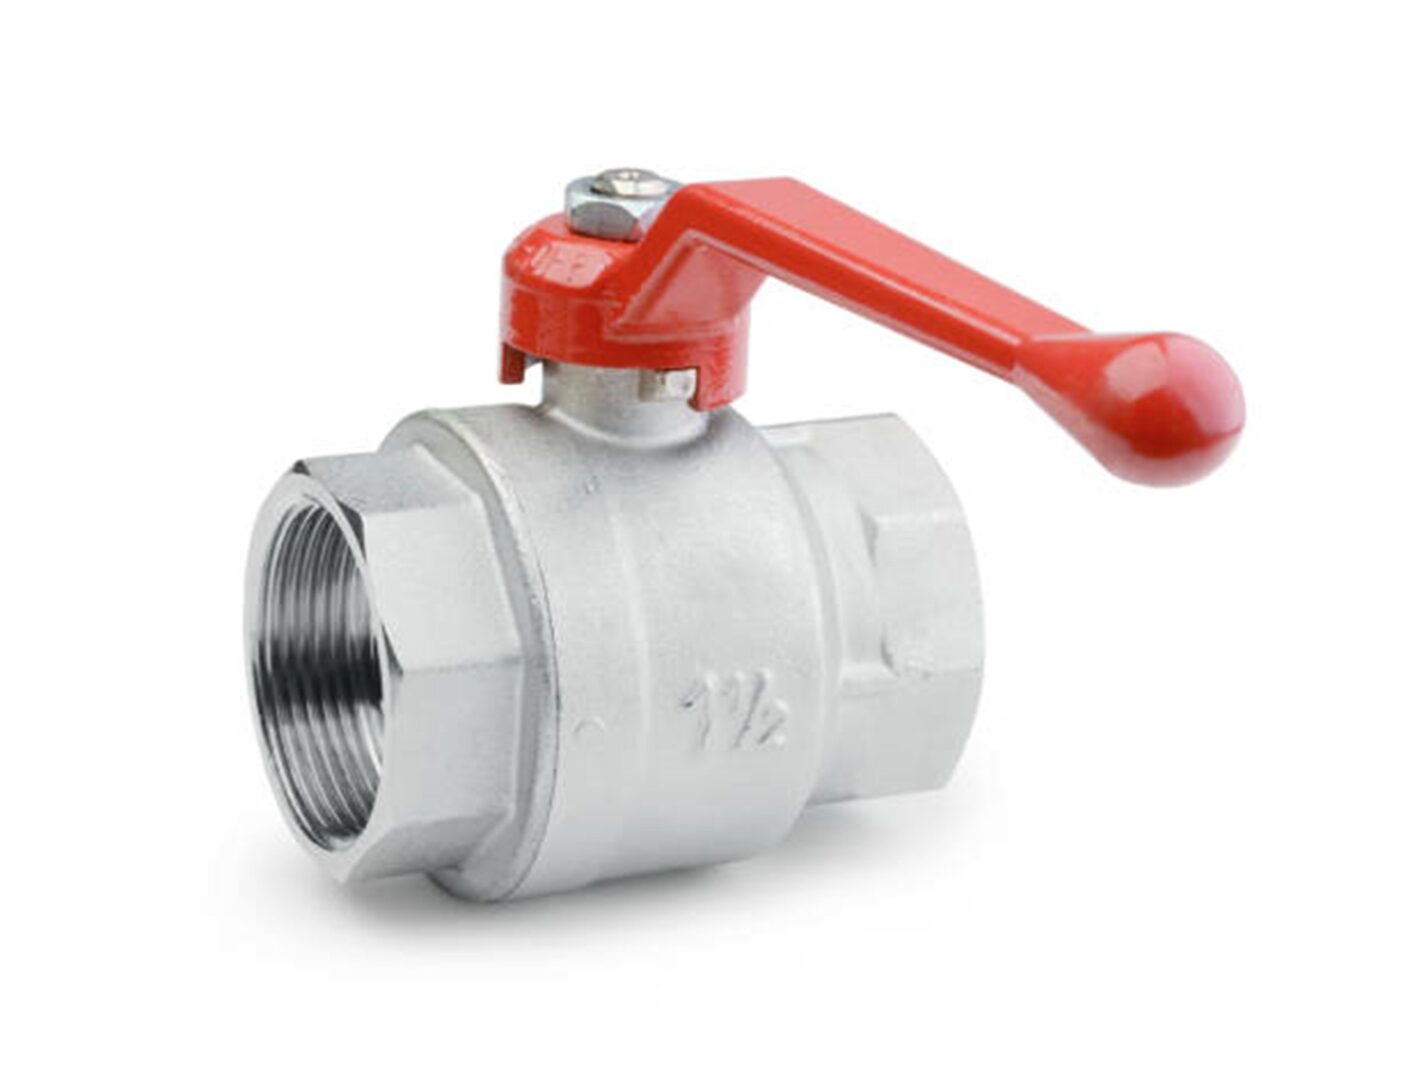 A red handle is on the ball valve.